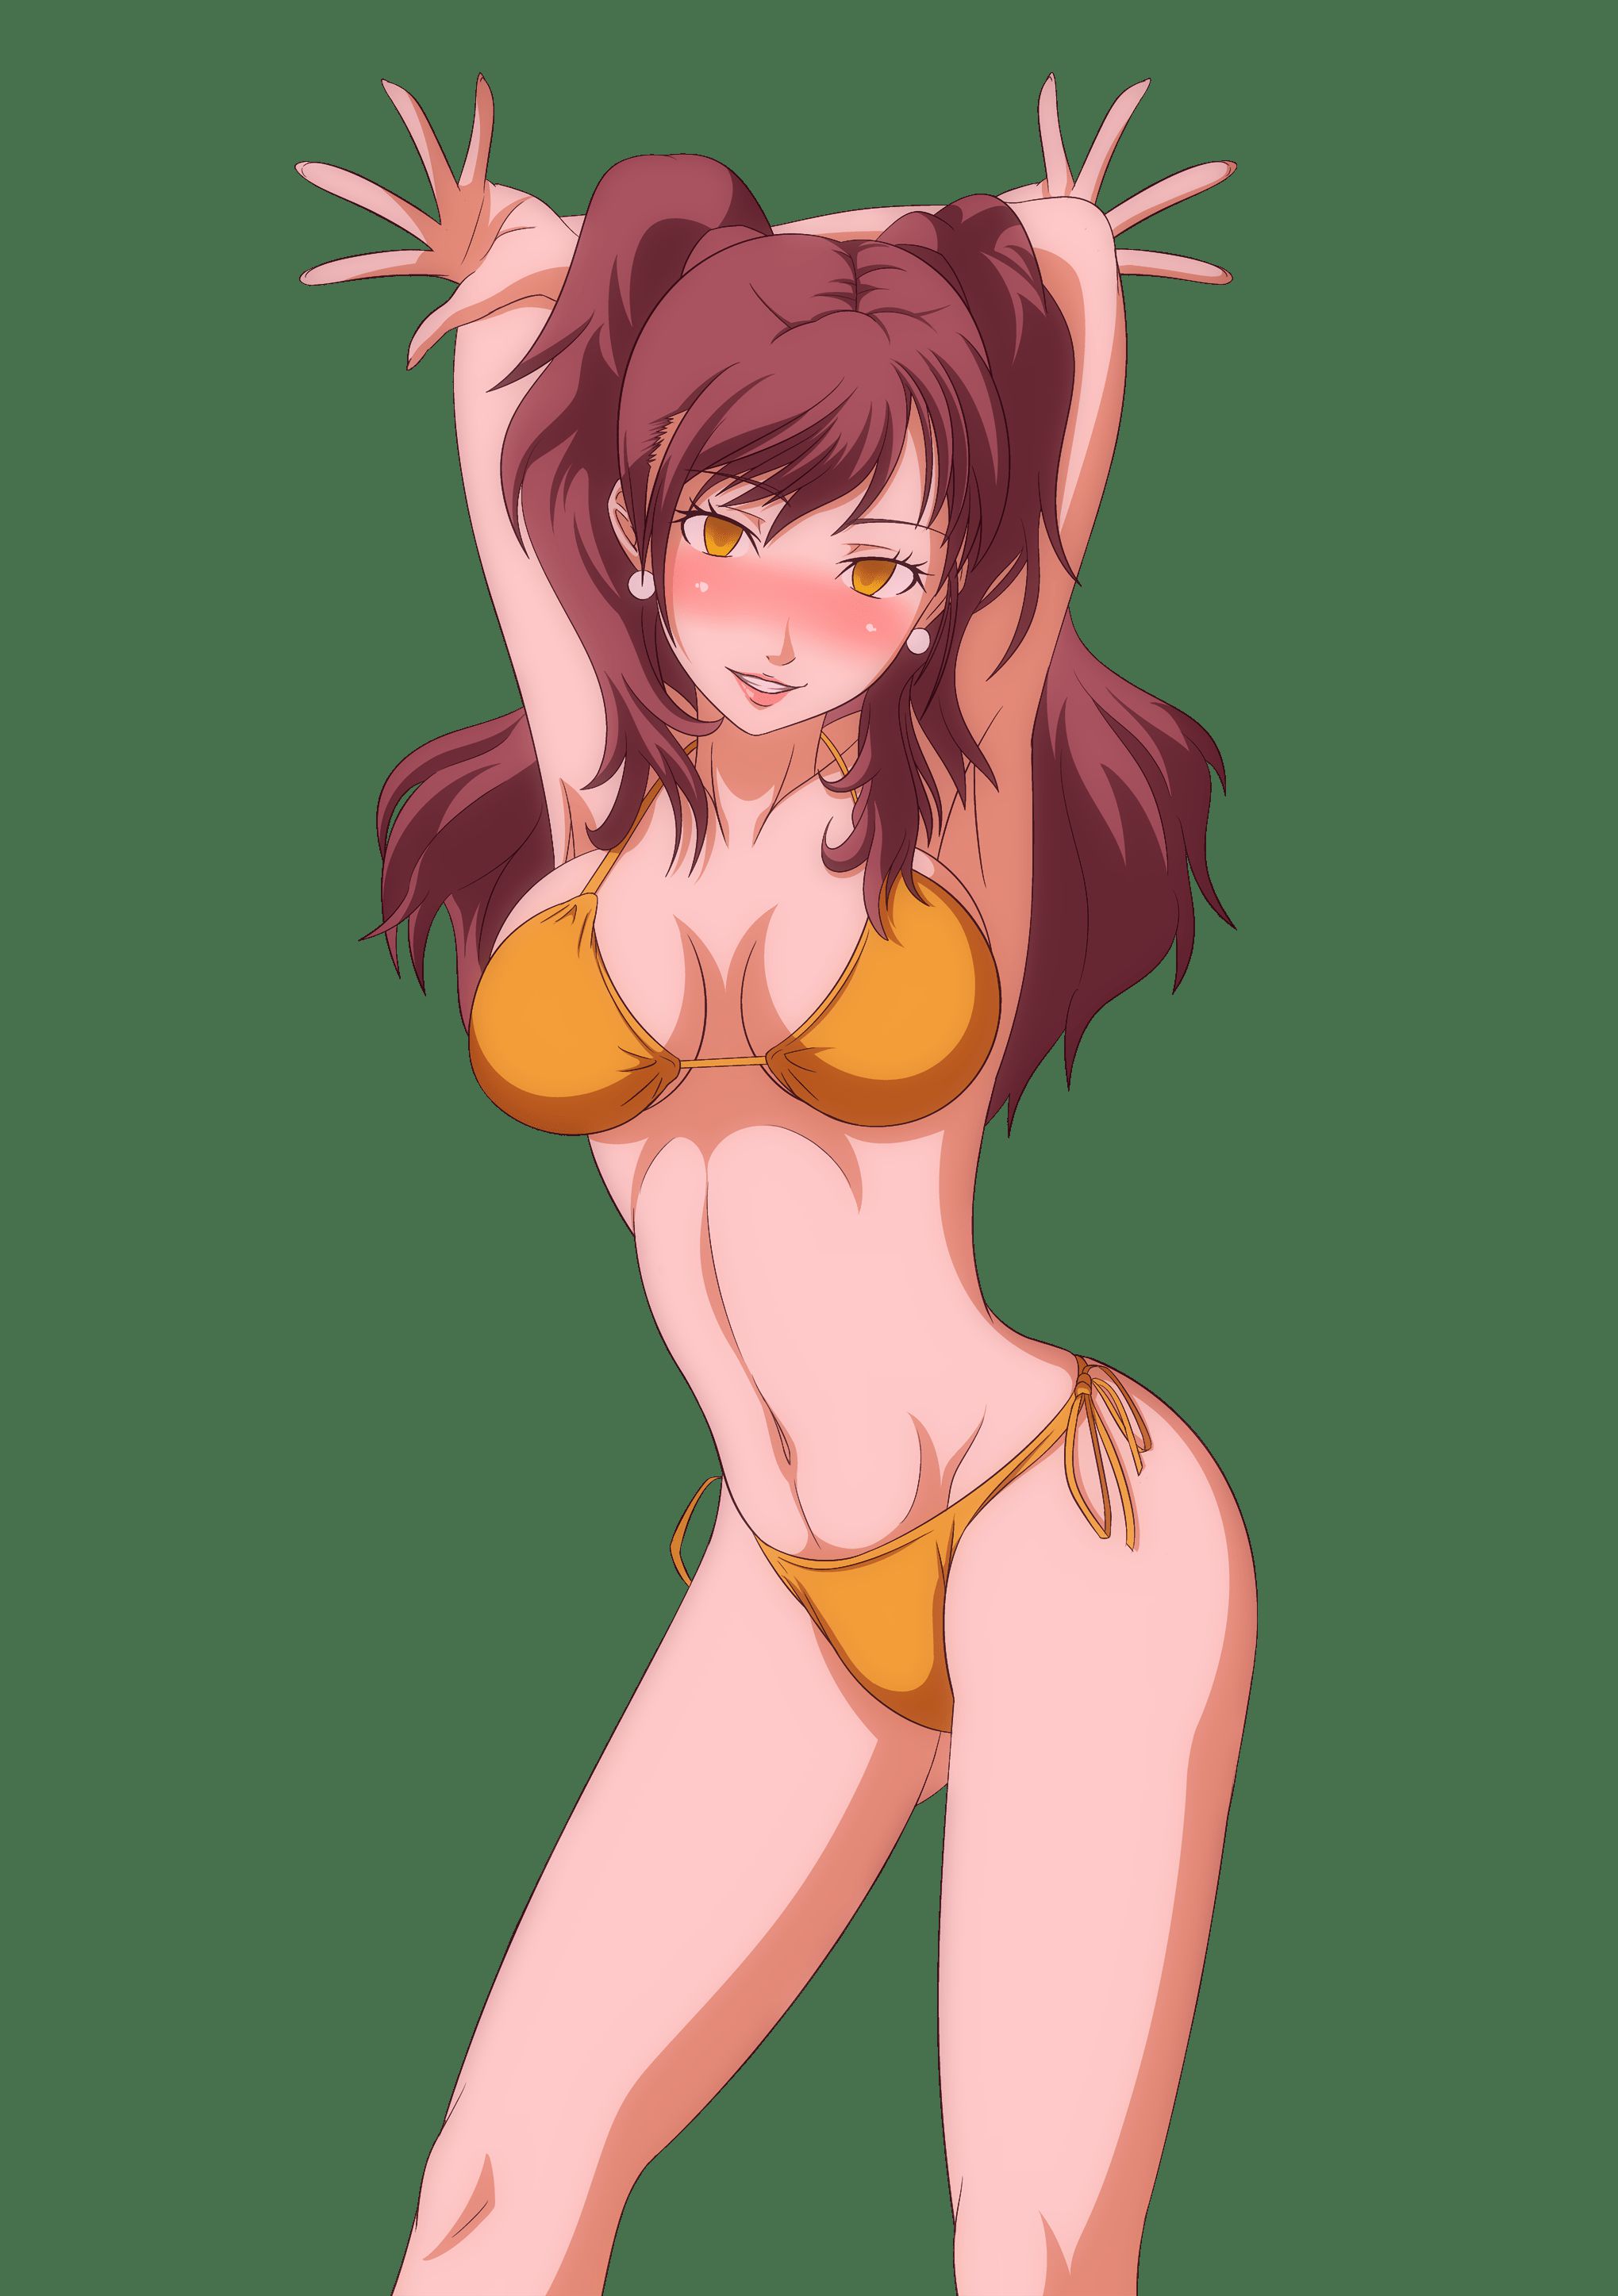 [Anime character material] png background erotic images of anime characters 86 31